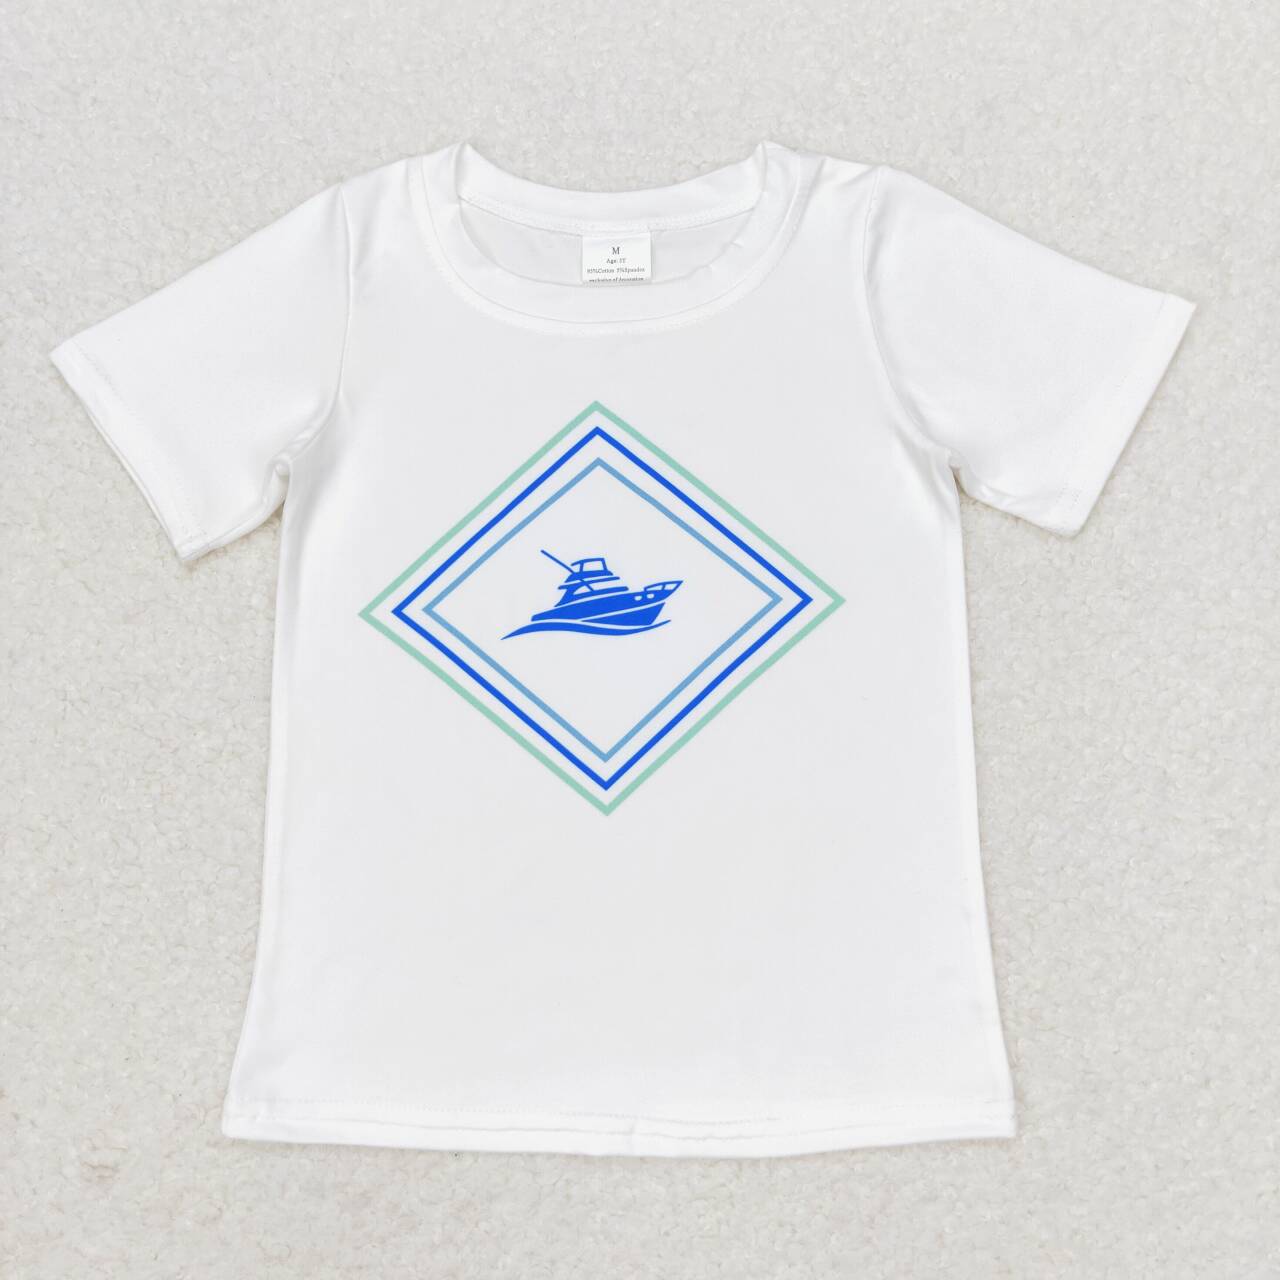 BT0613  Baby boys summer clothes short sleeves top kids